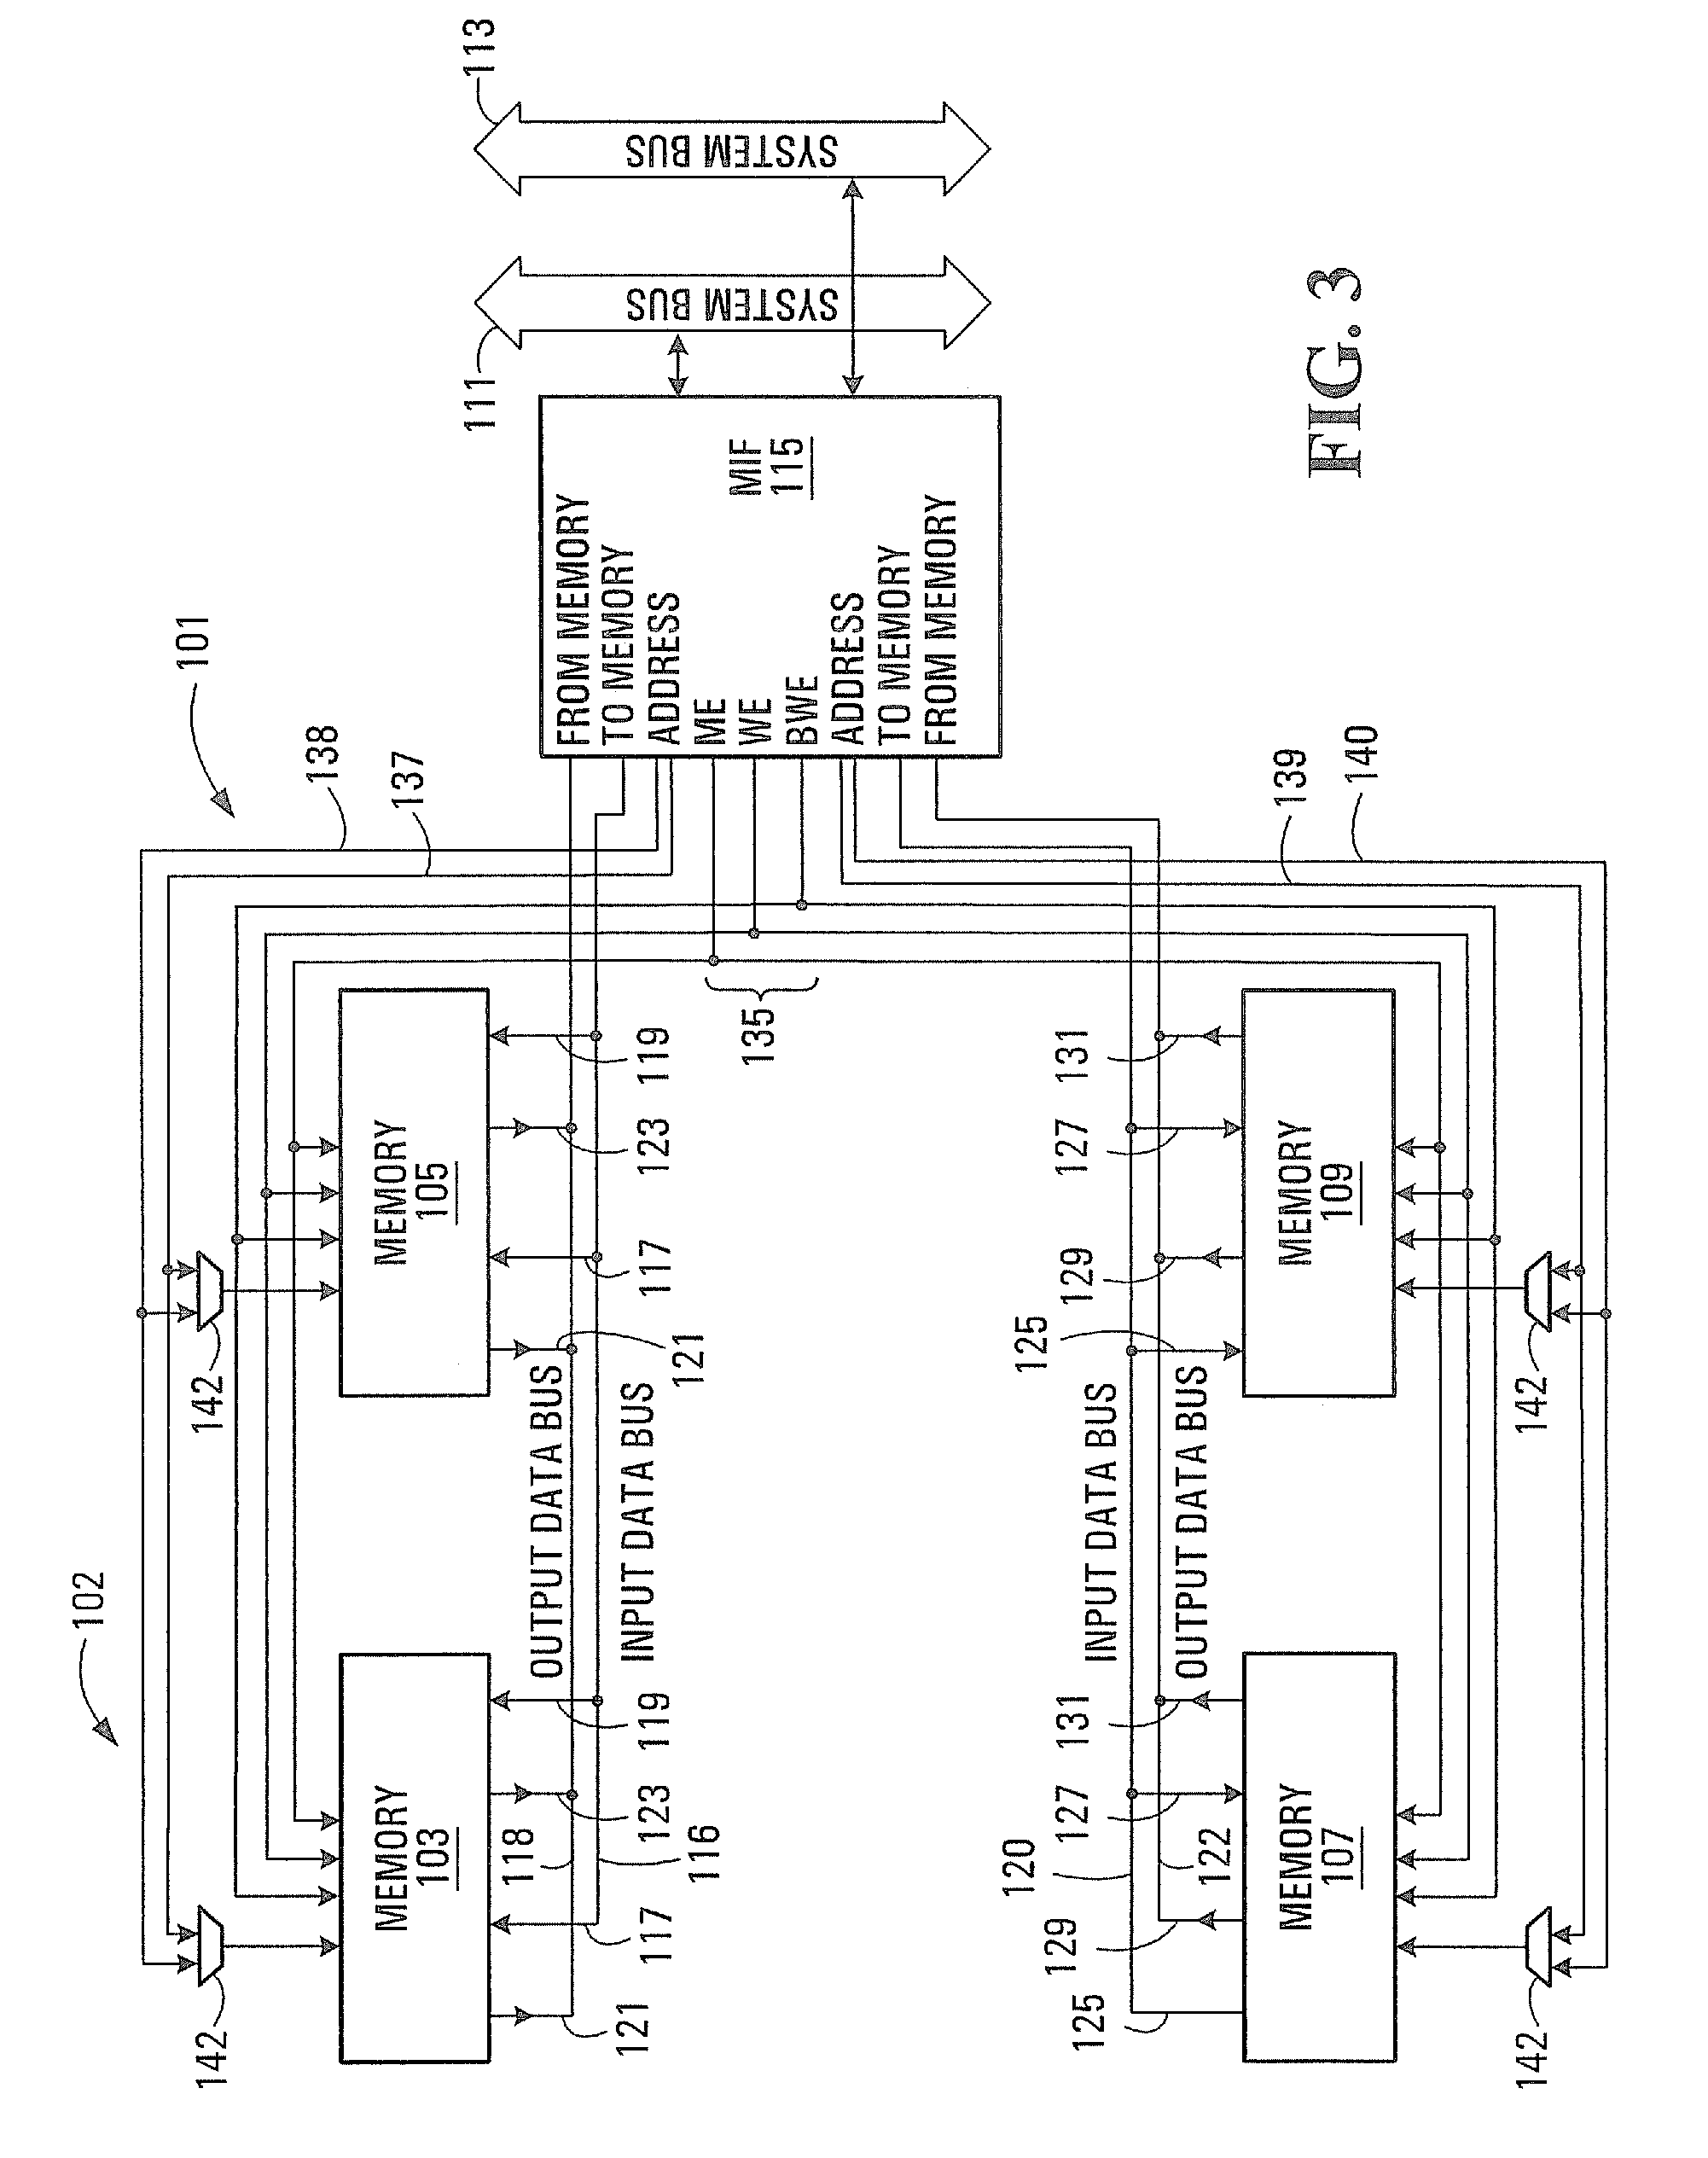 Apparatus and method for controlling access to a memory